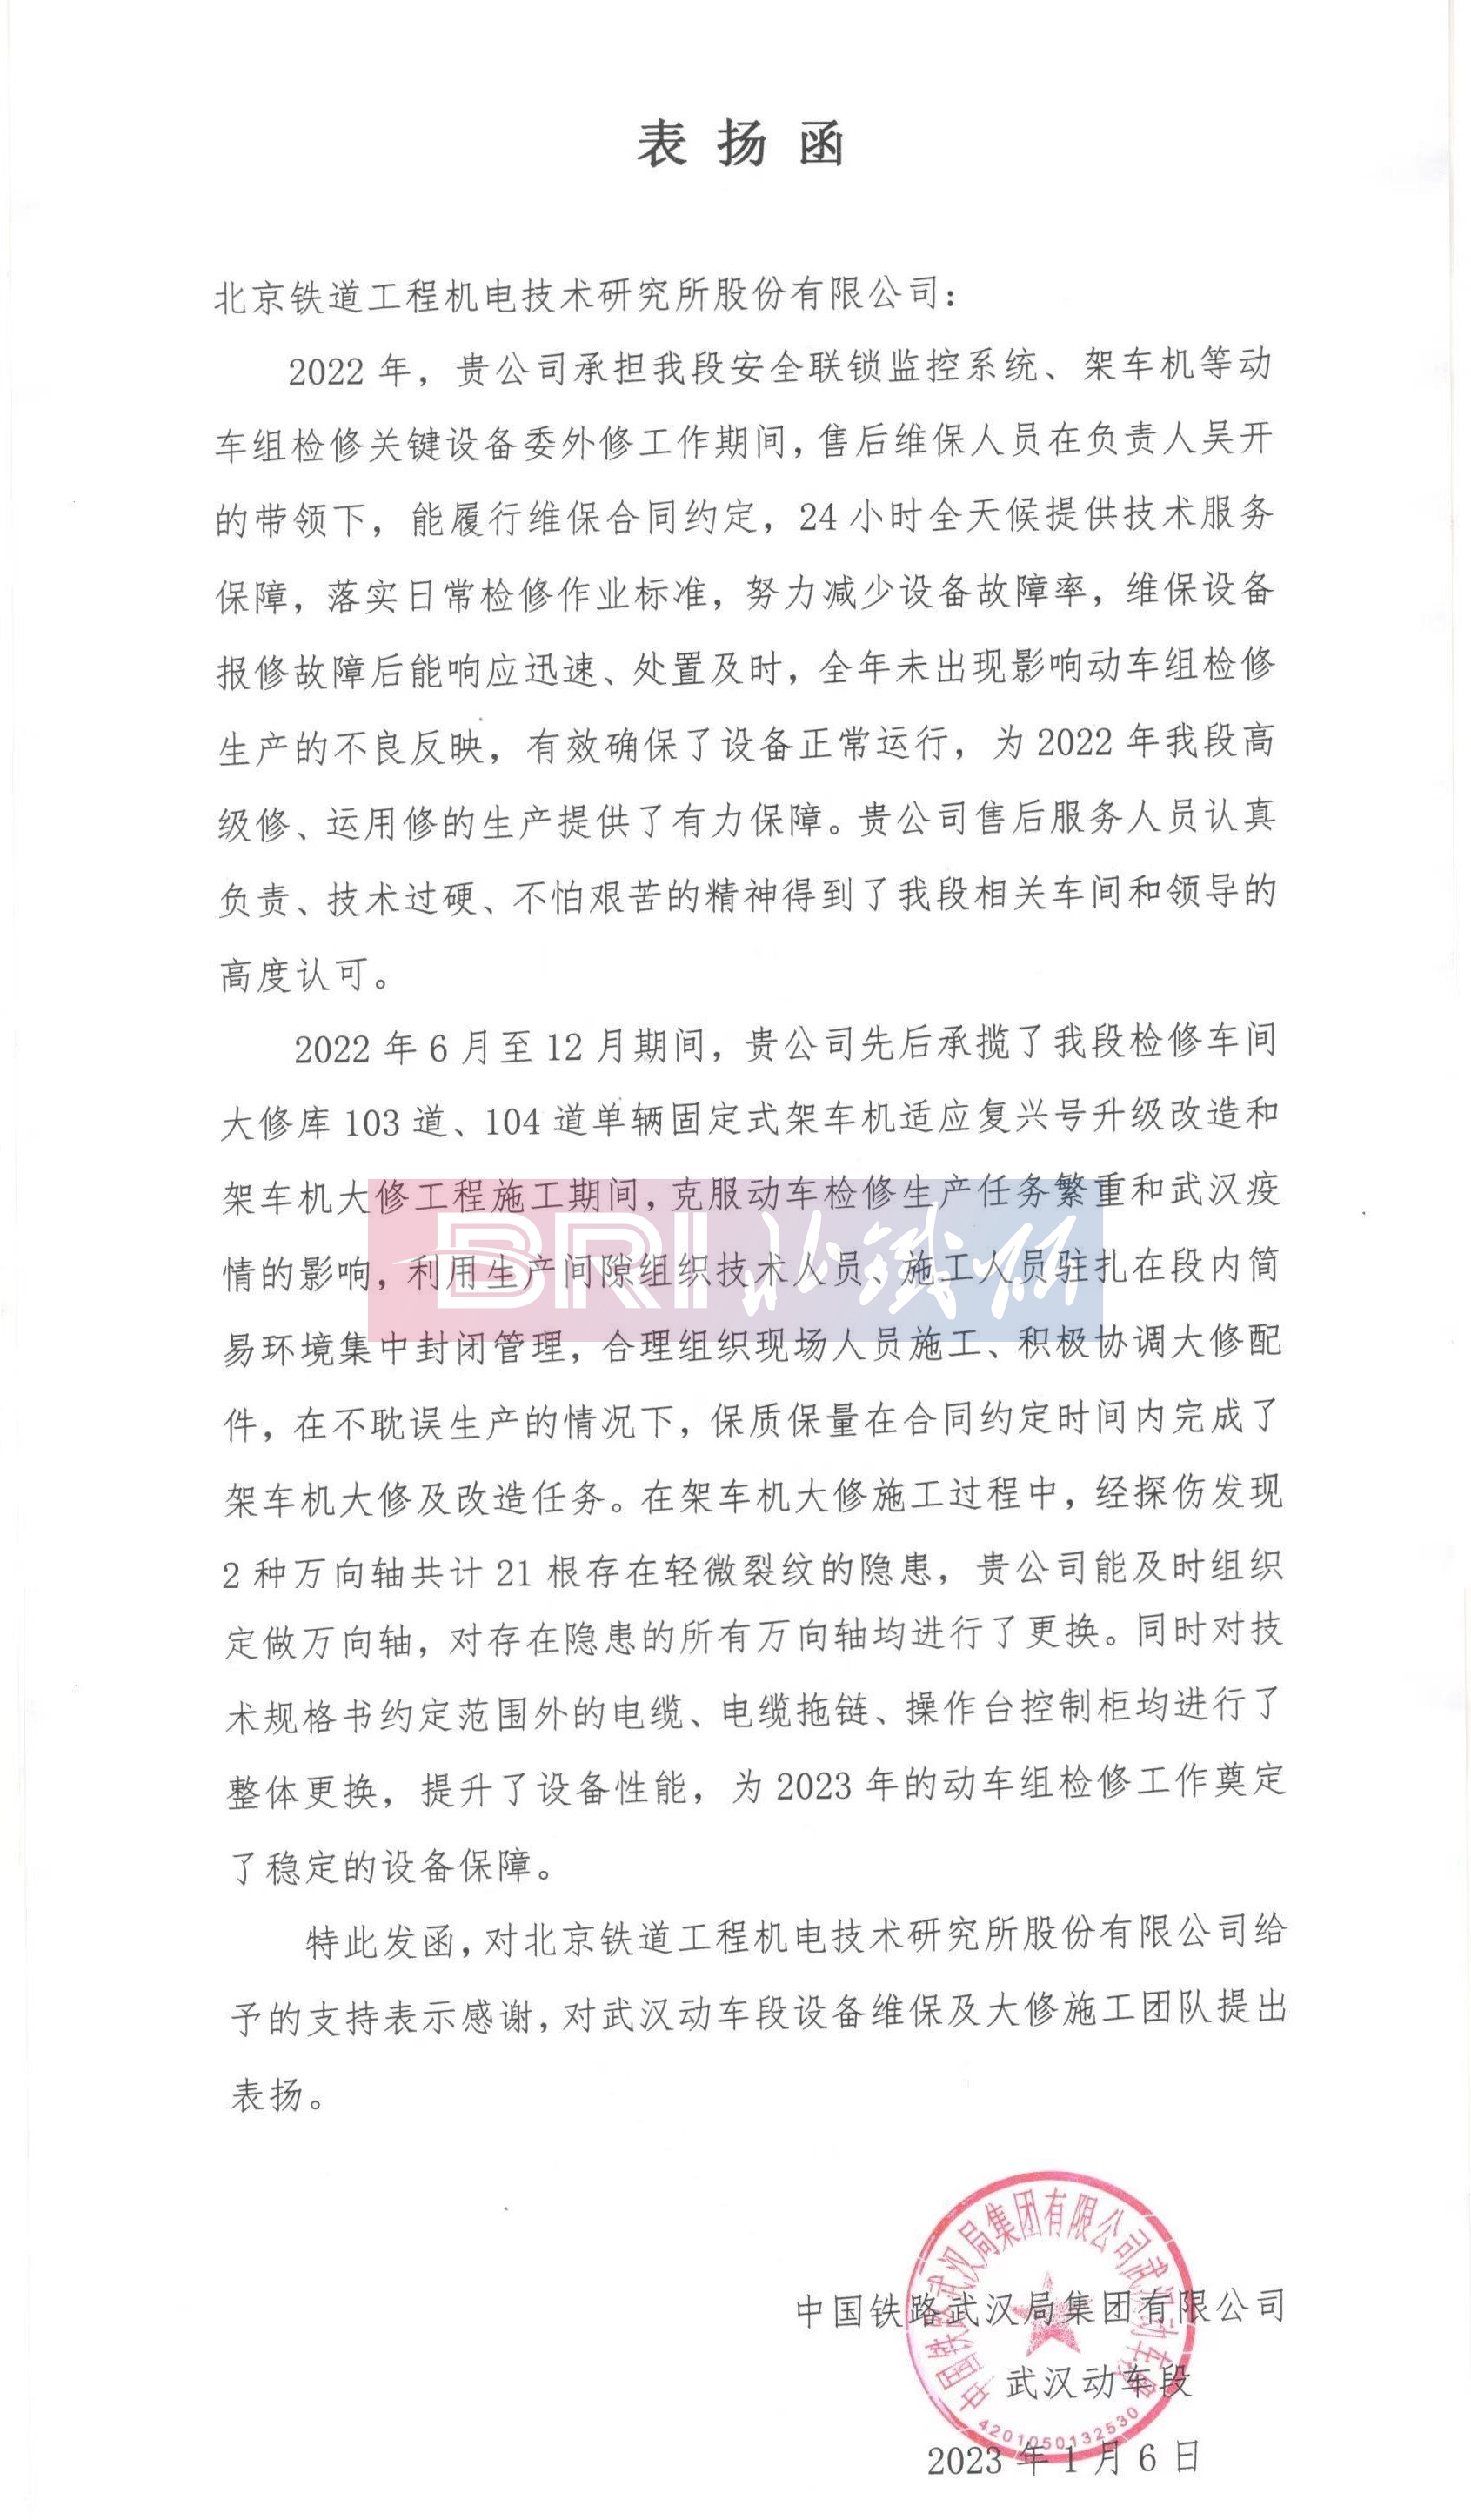 The commendation letter from Wuhan EMU Depot